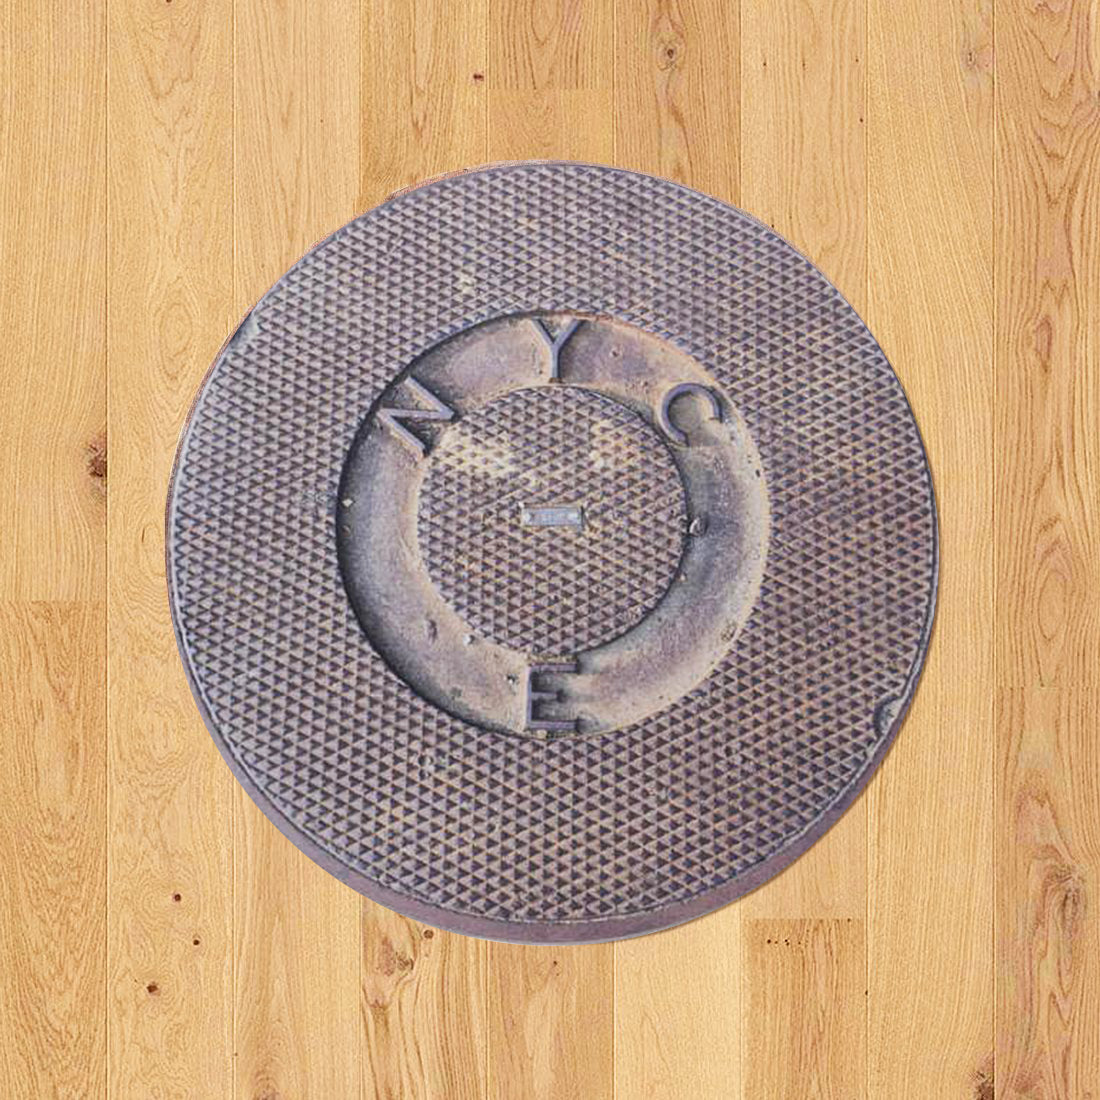 NYC SERIES - Sewer Cover Doormat, Trivet, Coaster - Flushing, NY